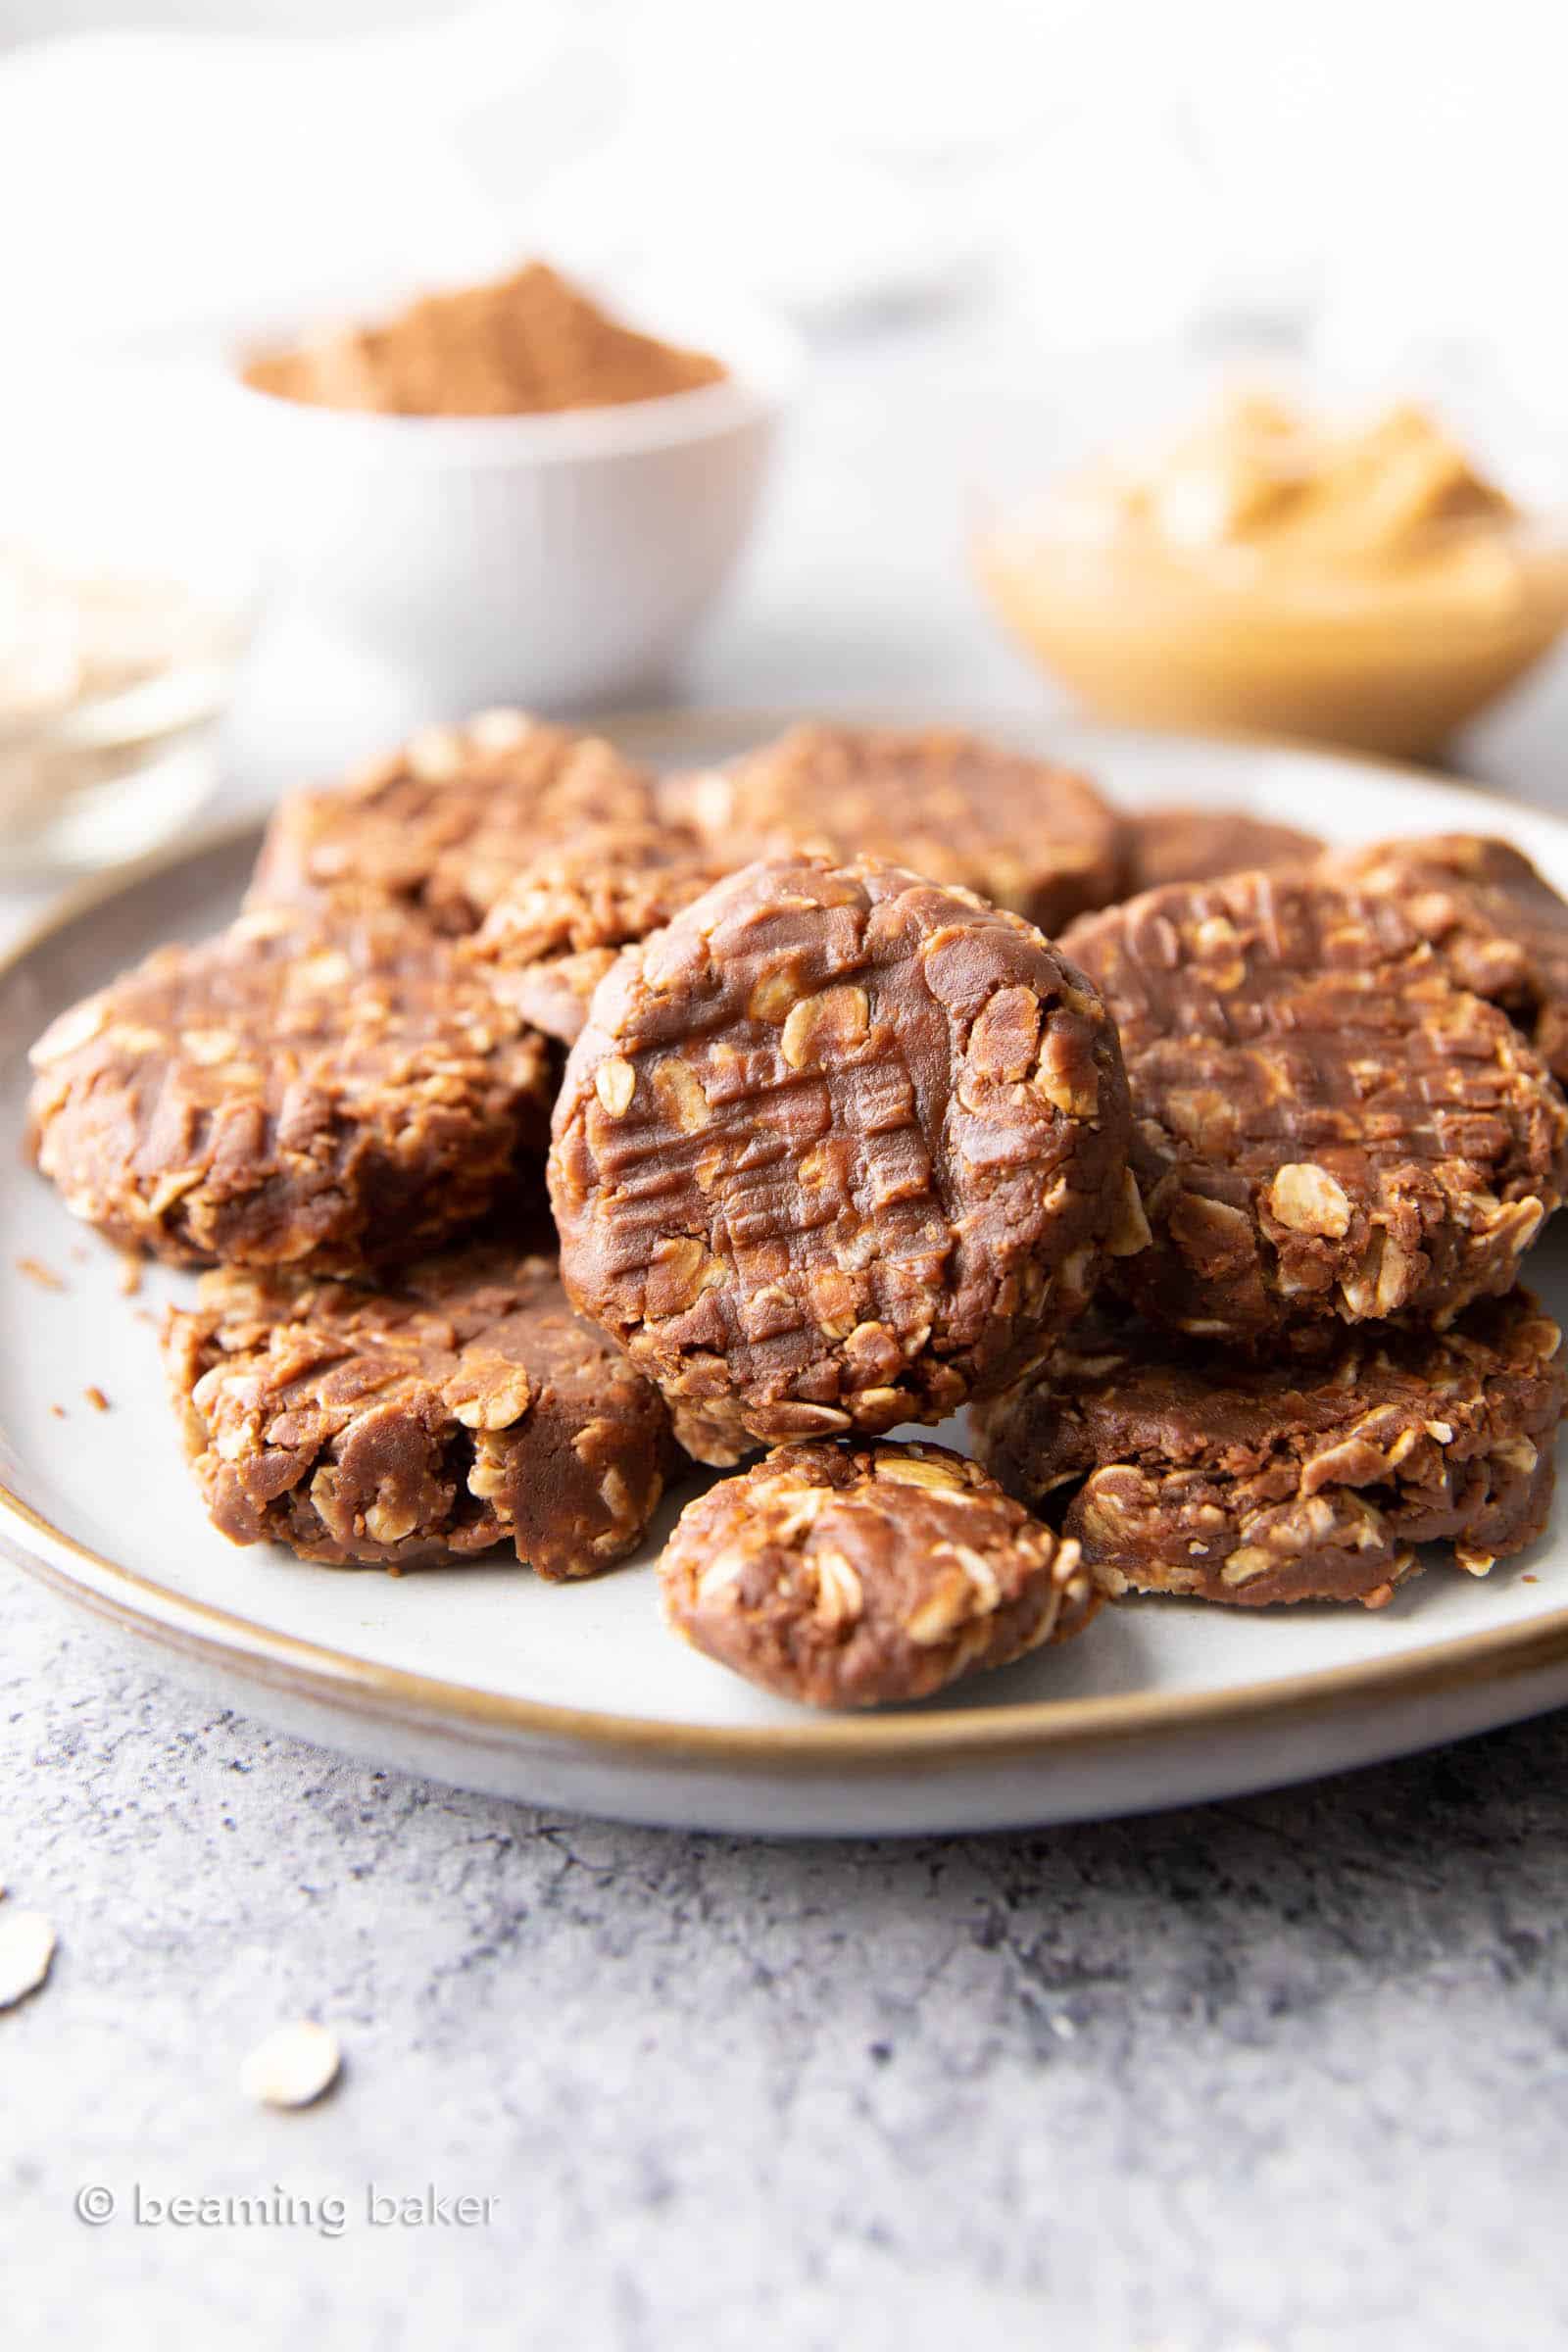 Simple & Easy No Bake Chocolate Oatmeal Cookies: just 4 ingredients for soft & chewy no bake cookies prepared in minutes! Delicious, Healthy and Easy! #NoBake #Oatmeal #Cookies #Chocolate | Recipe at BeamingBaker.com